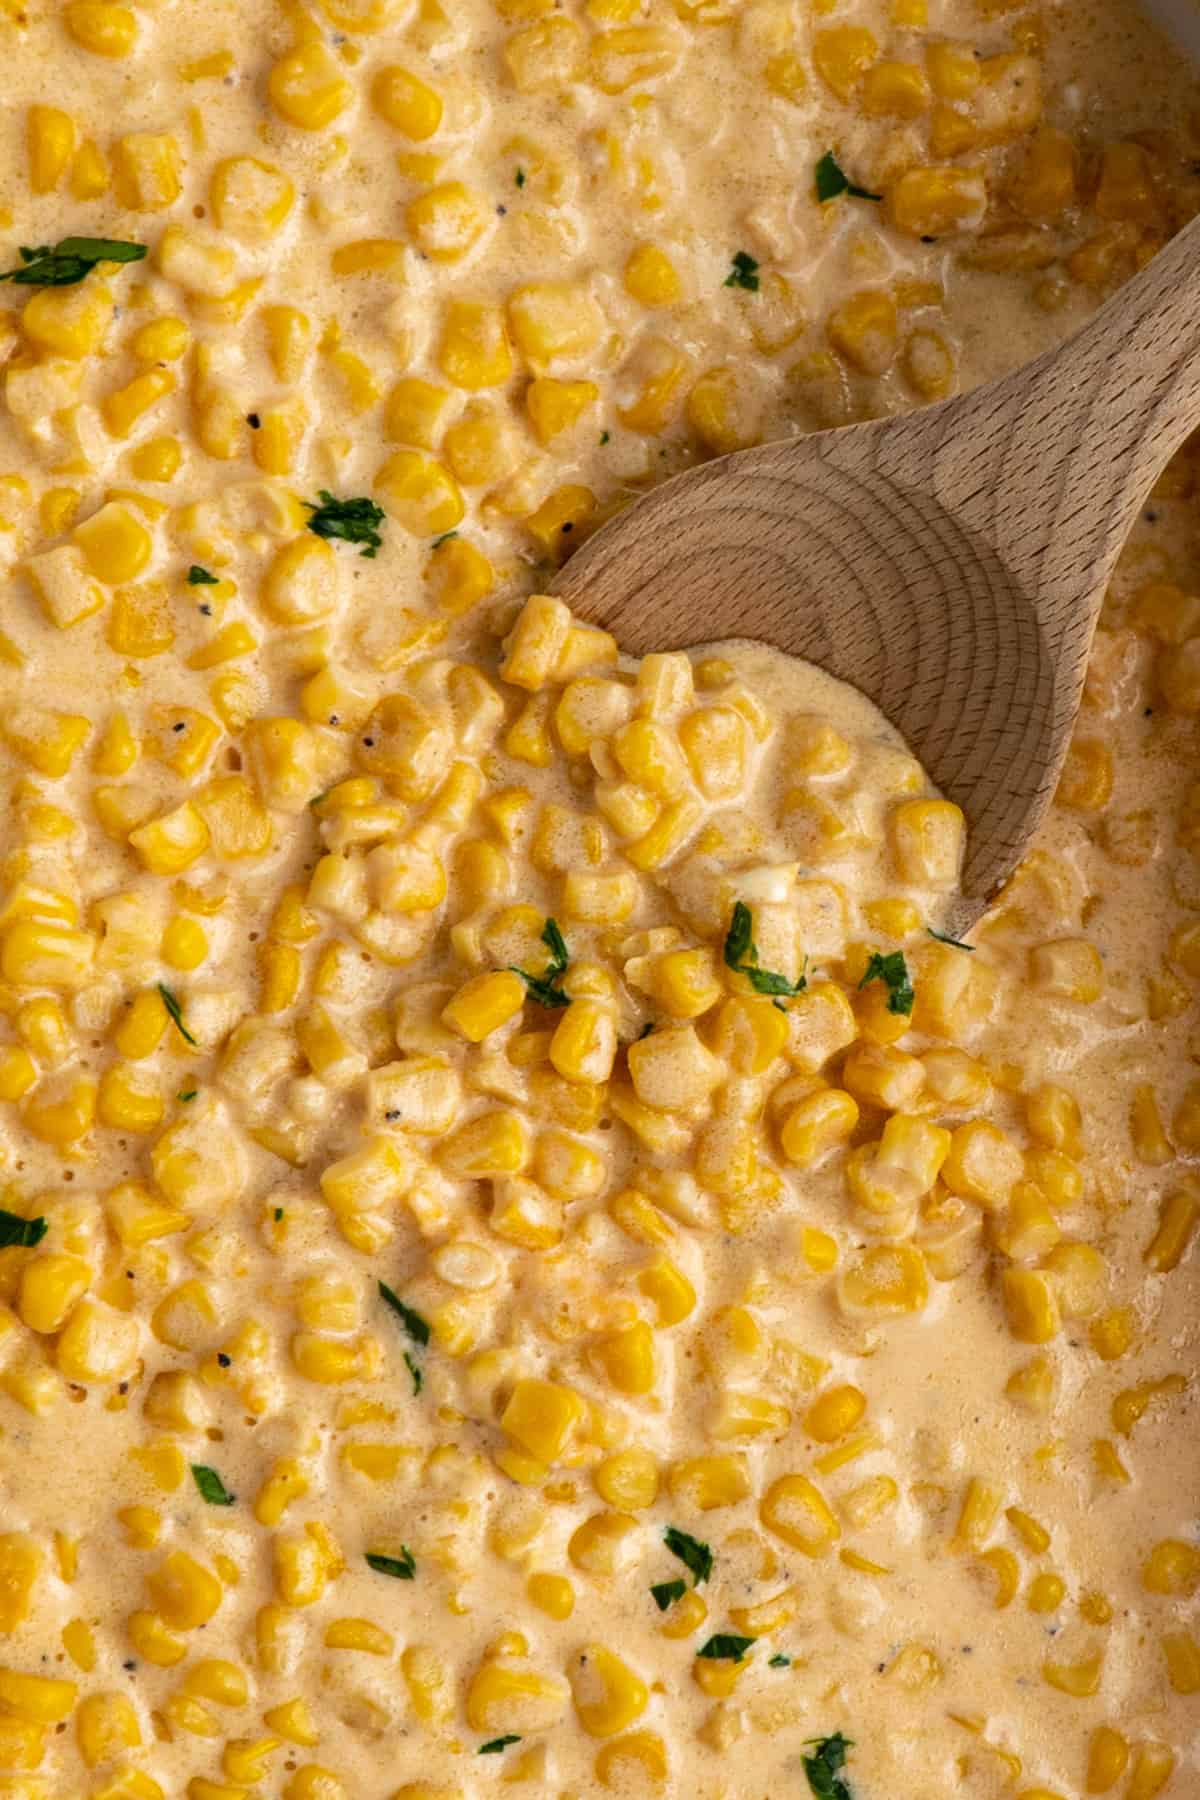 Creamed corn in a slow cooker with a wooden spoon.